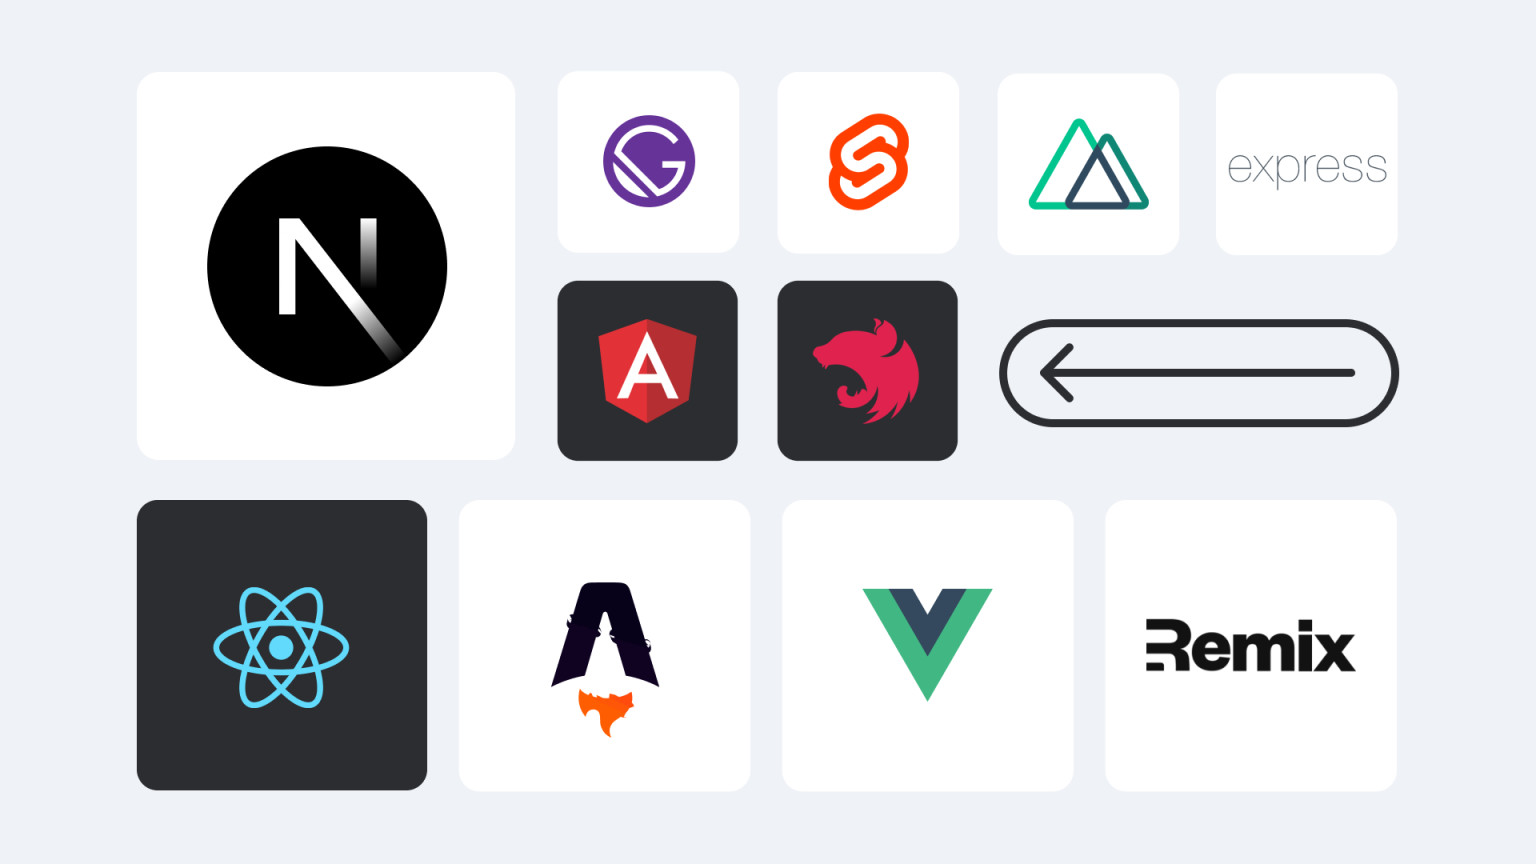 We held a poll to ask developers about their favorite JavaScript frameworks. These are the 12 best JavaScript frameworks according to our Discord community.